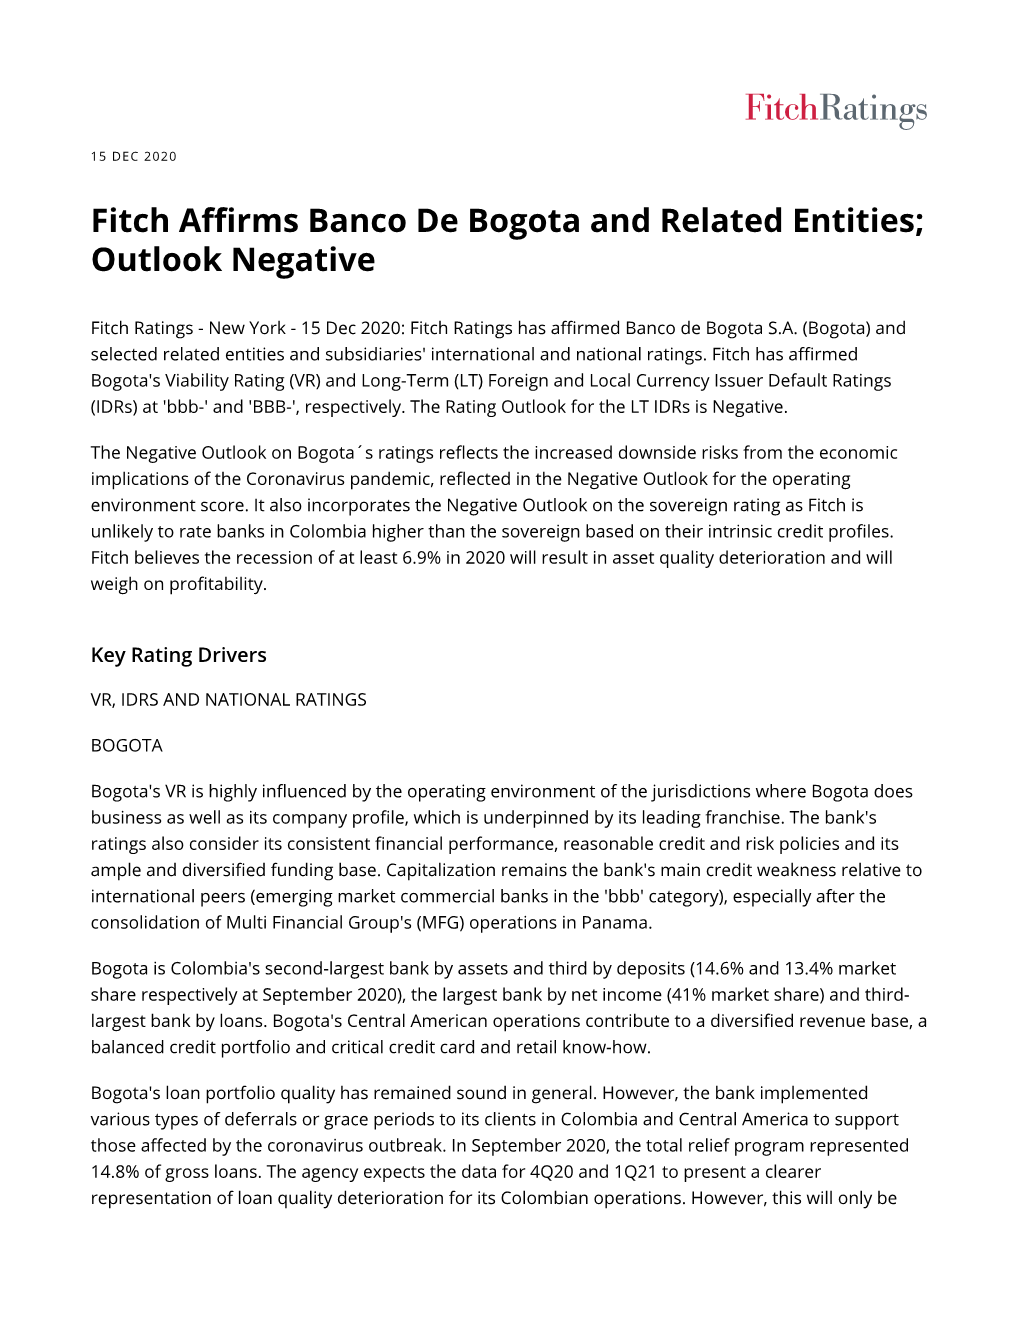 Fitch Affirms Banco De Bogota and Related Entities; Outlook Negative